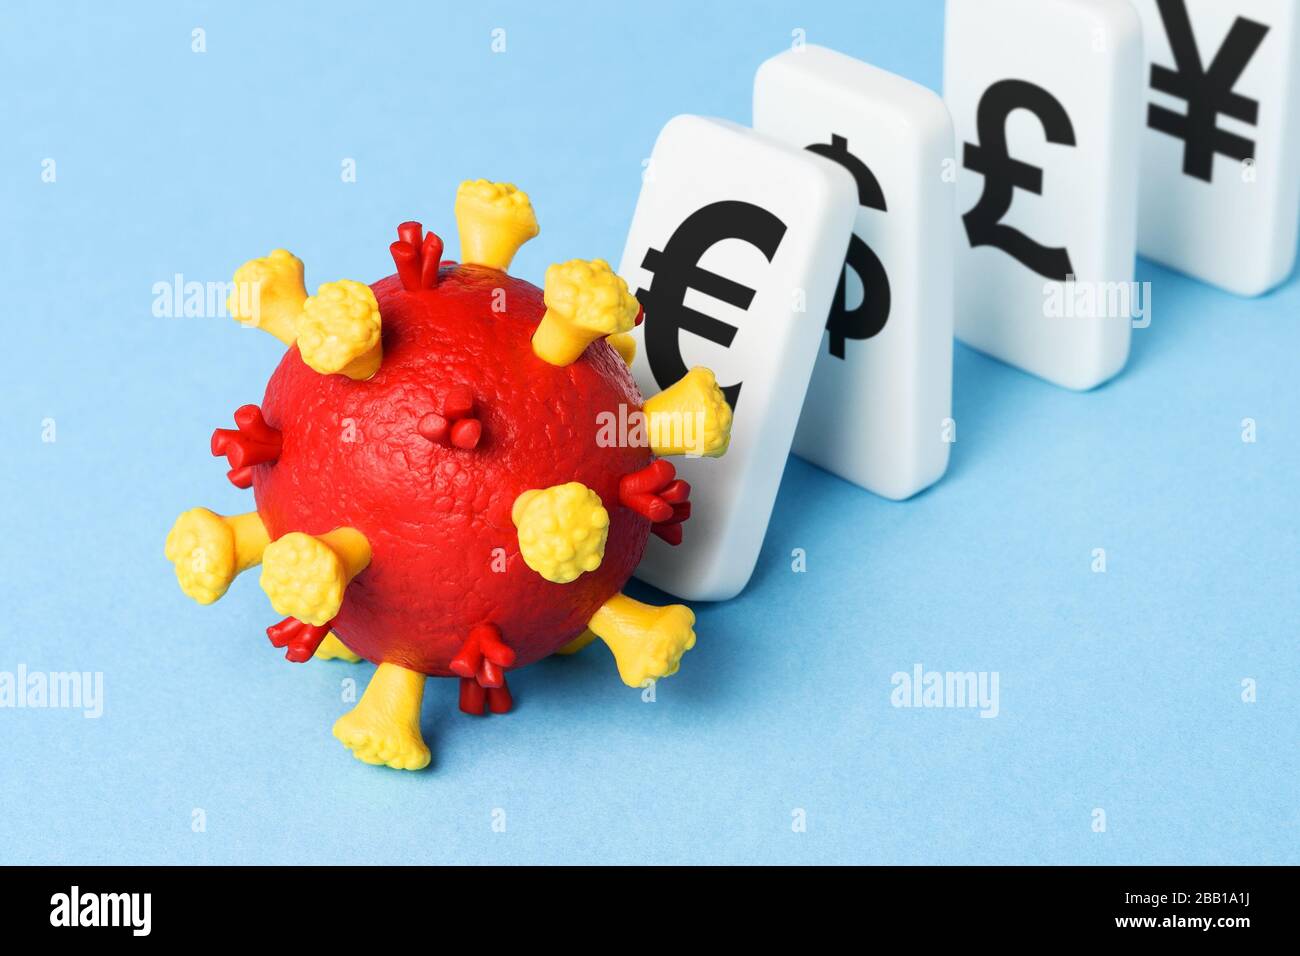 Collapse of the global economy. Covid 19 pandemic causes financial crisis. Market losses Stock Photo